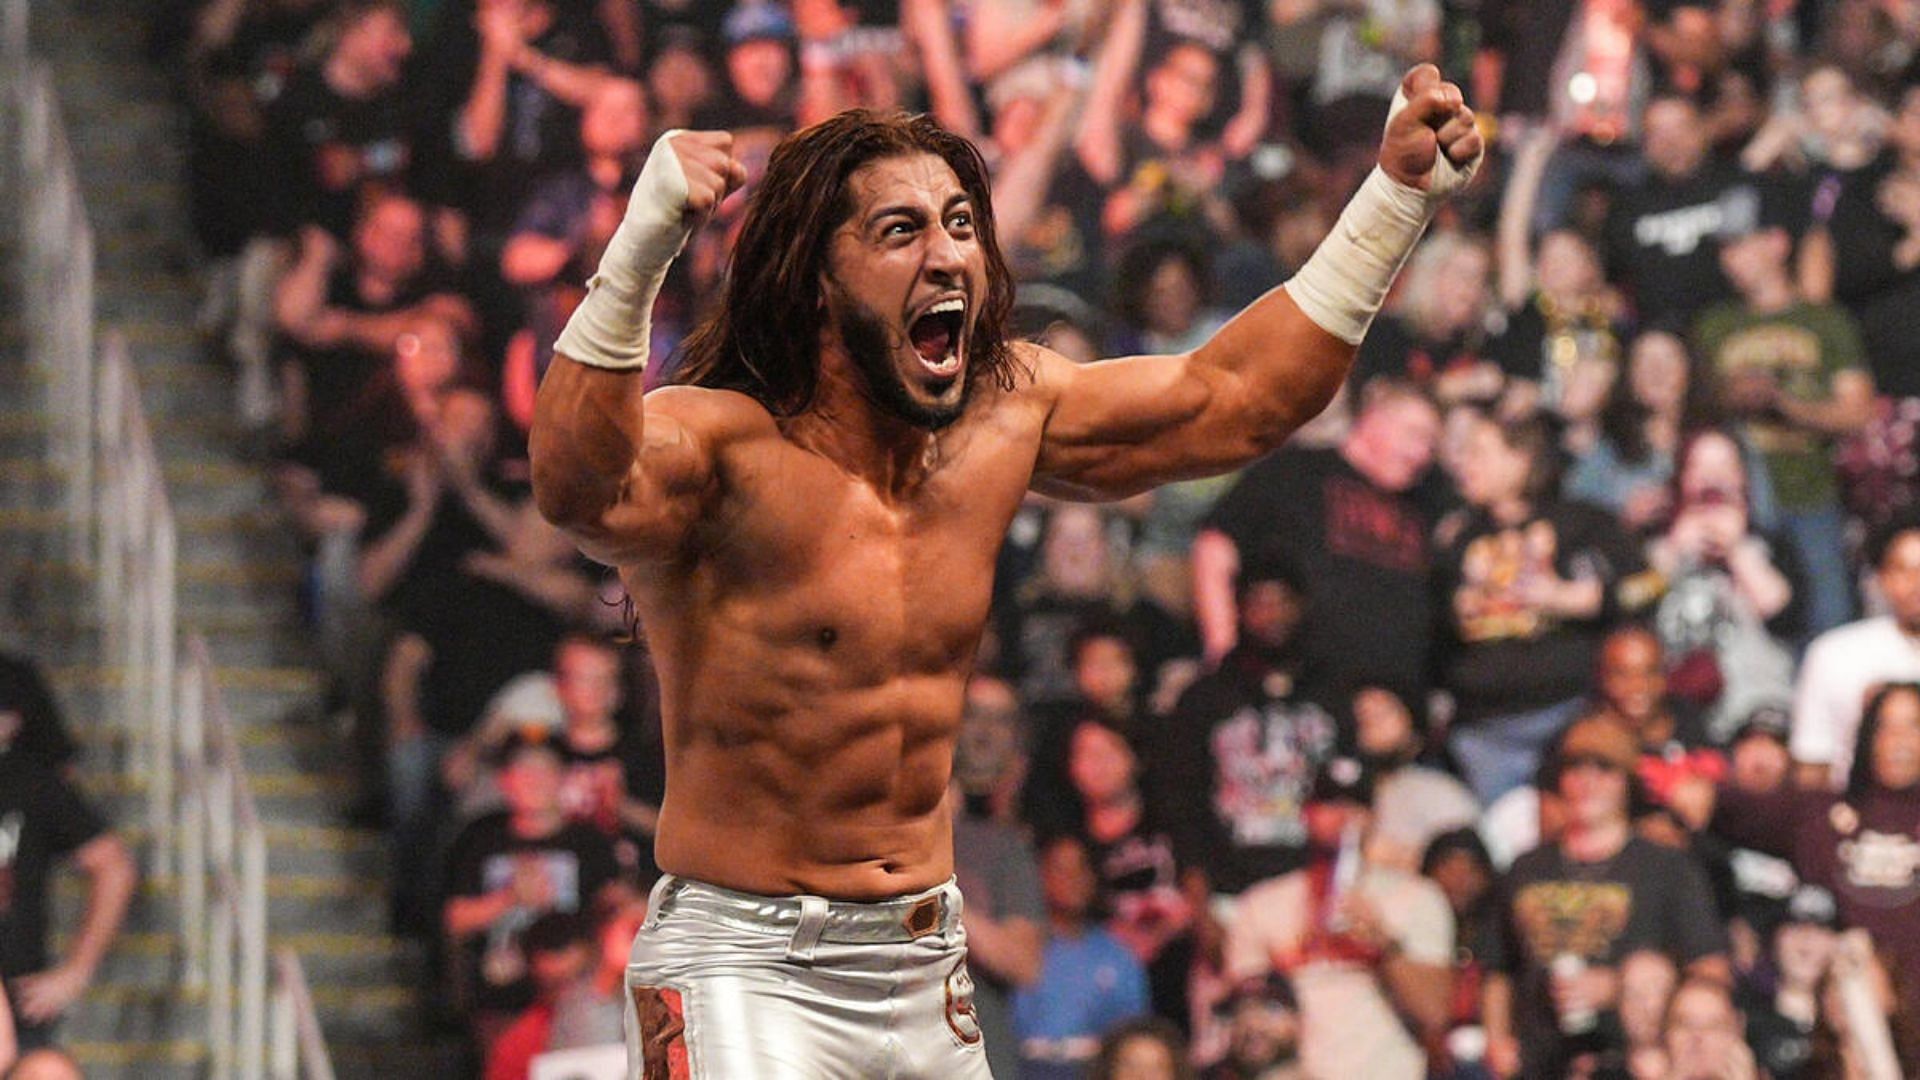 The former WWE star has now won a huge title